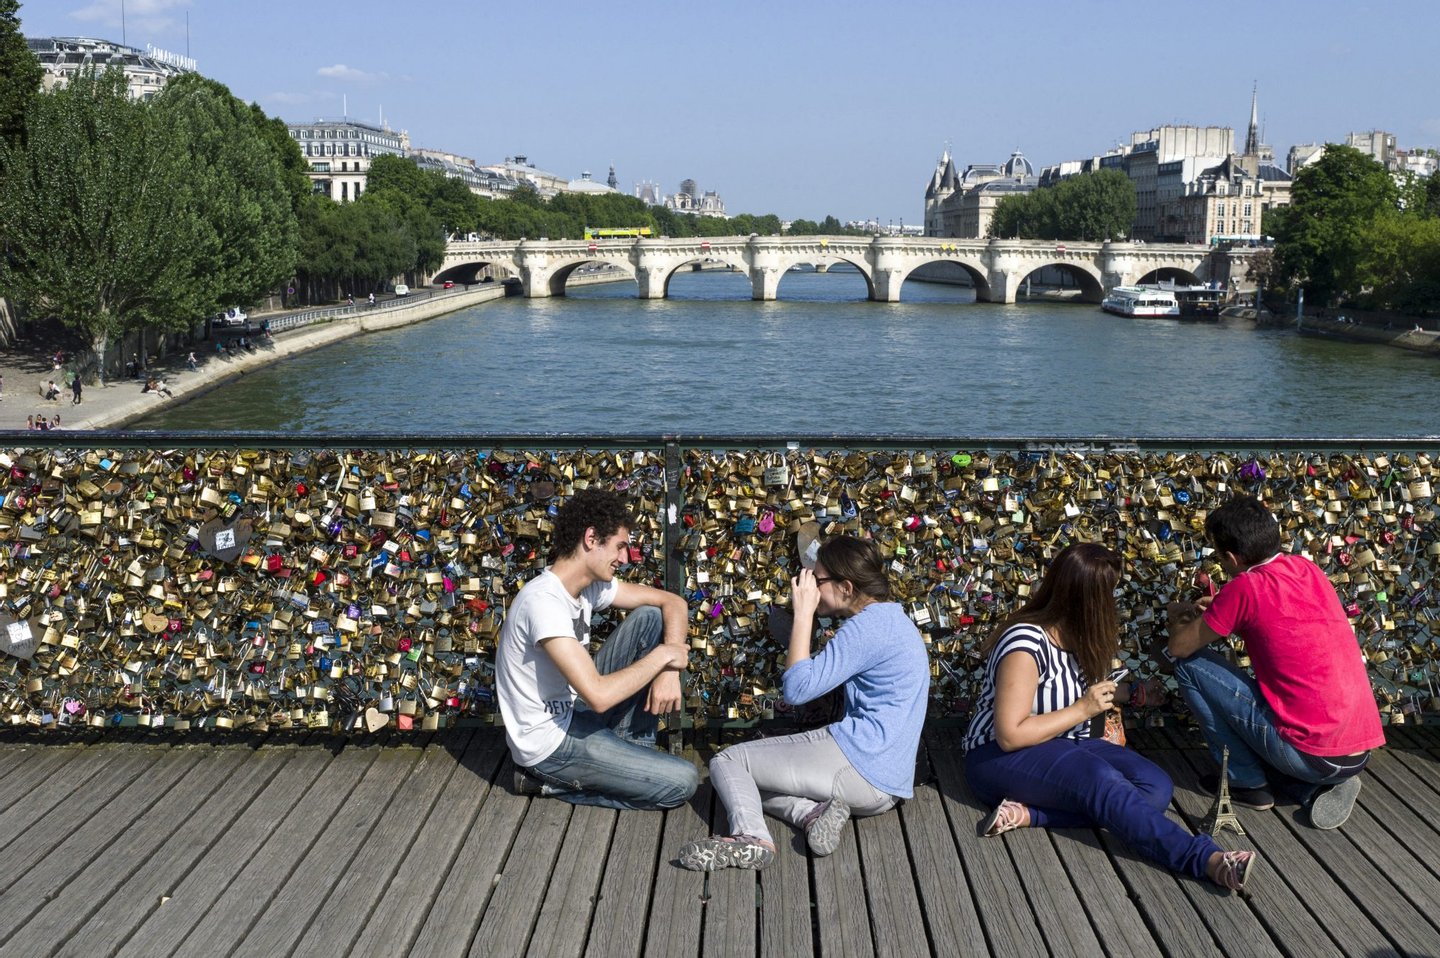 People gather at the "Pont des Arts" bridge on July 5, 2013 in Paris. AFP PHOTO / FRED DUFOUR (Photo credit should read FRED DUFOUR/AFP/Getty Images)